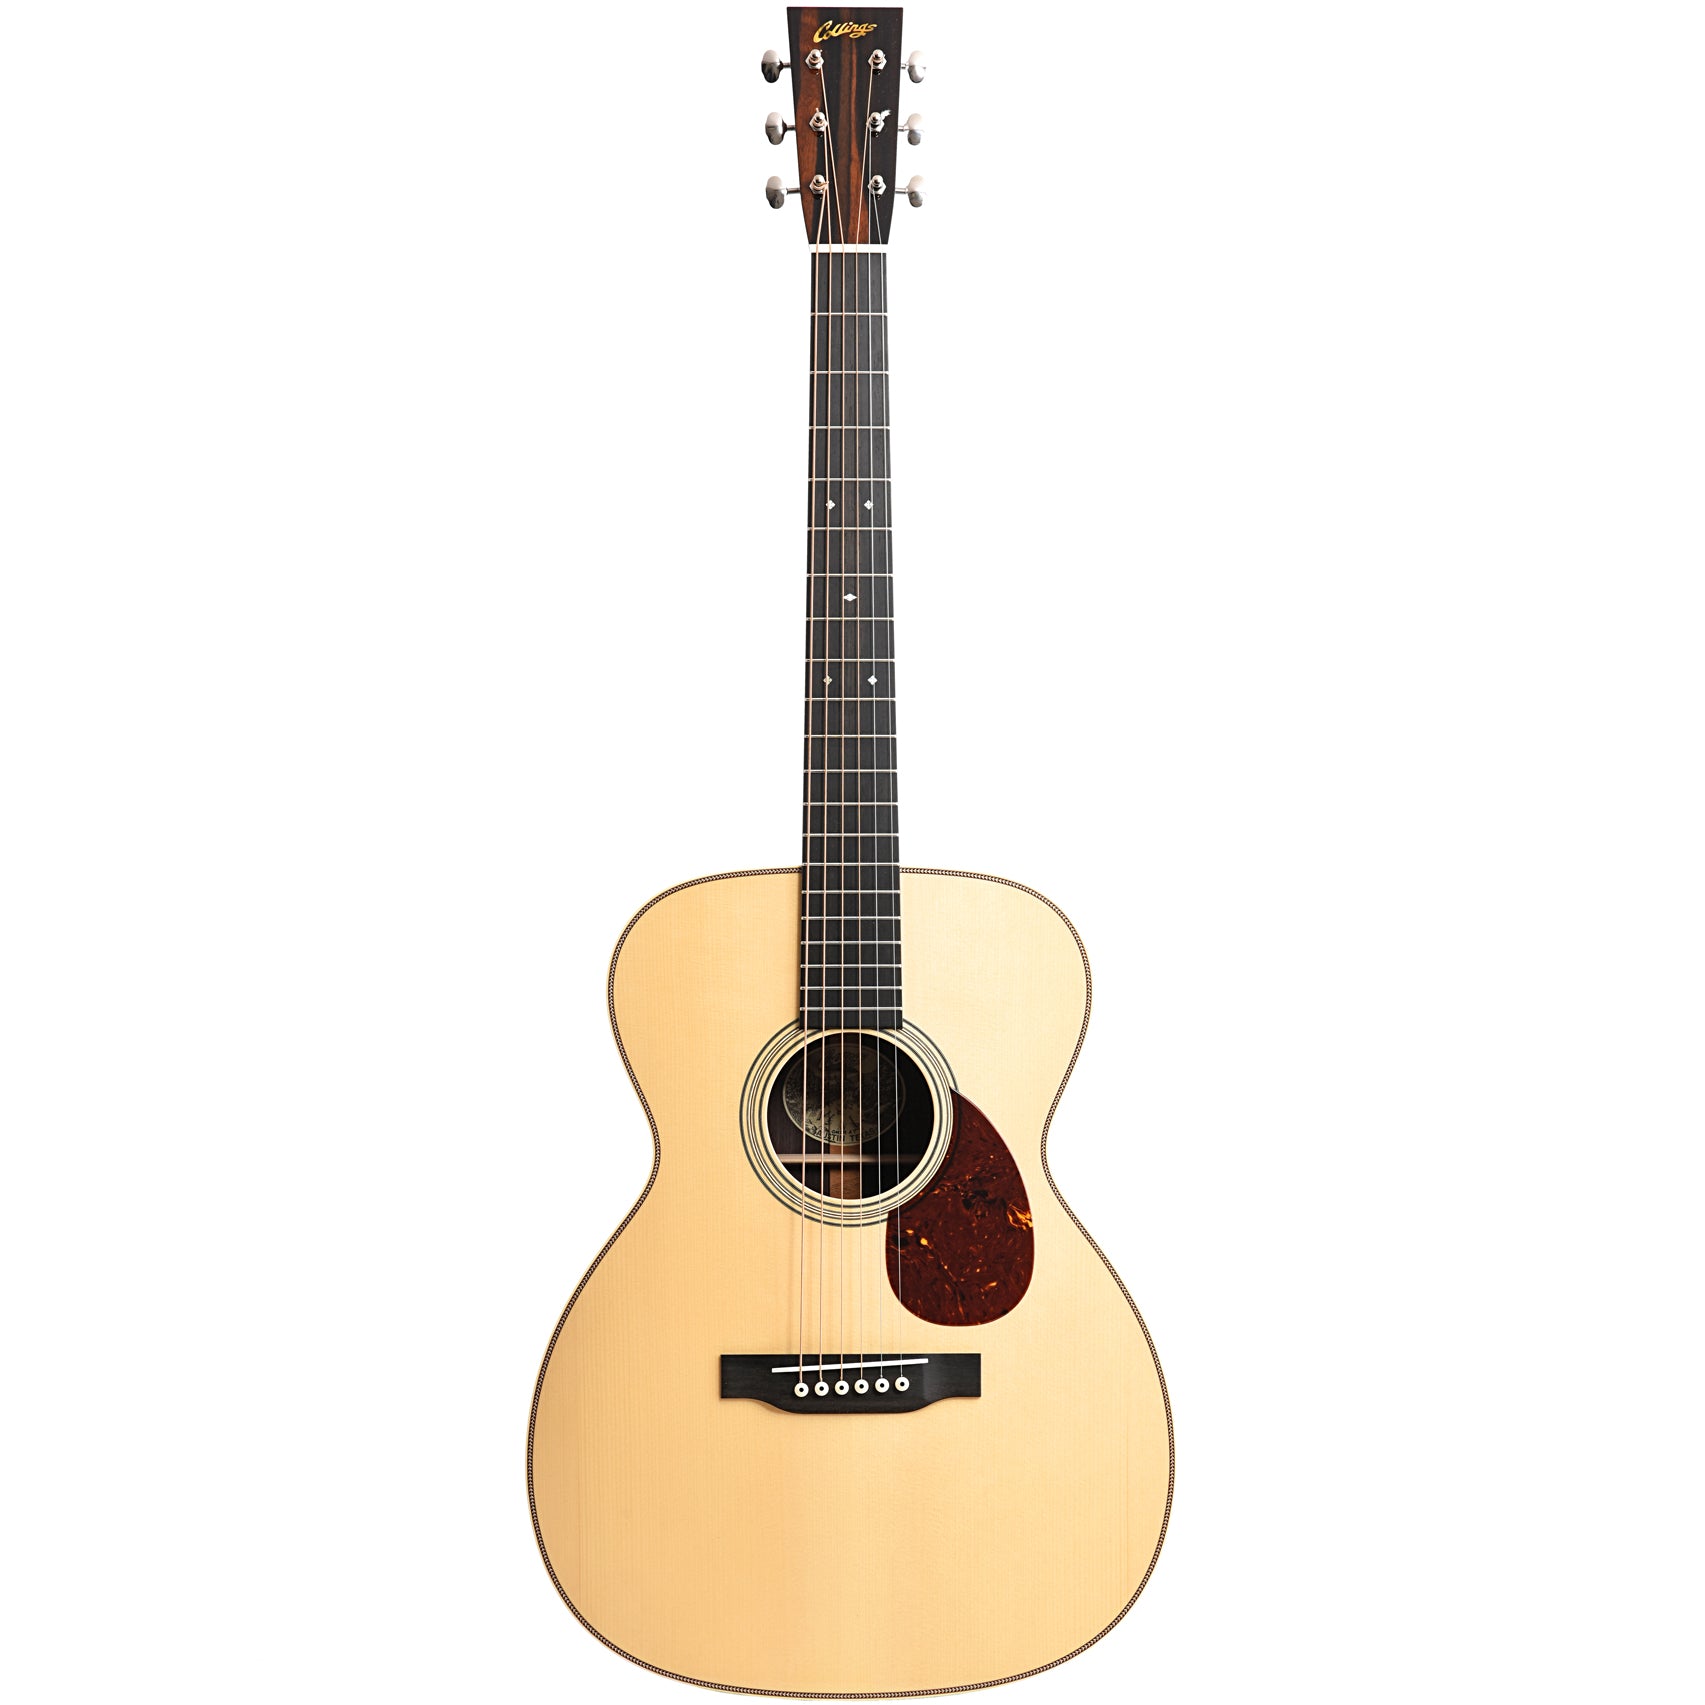 Image 2 of Collings OM2HT Traditional Series Guitar & Case, Adirondack Top - SKU# COLOM2HT-I-A : Product Type Flat-top Guitars : Elderly Instruments